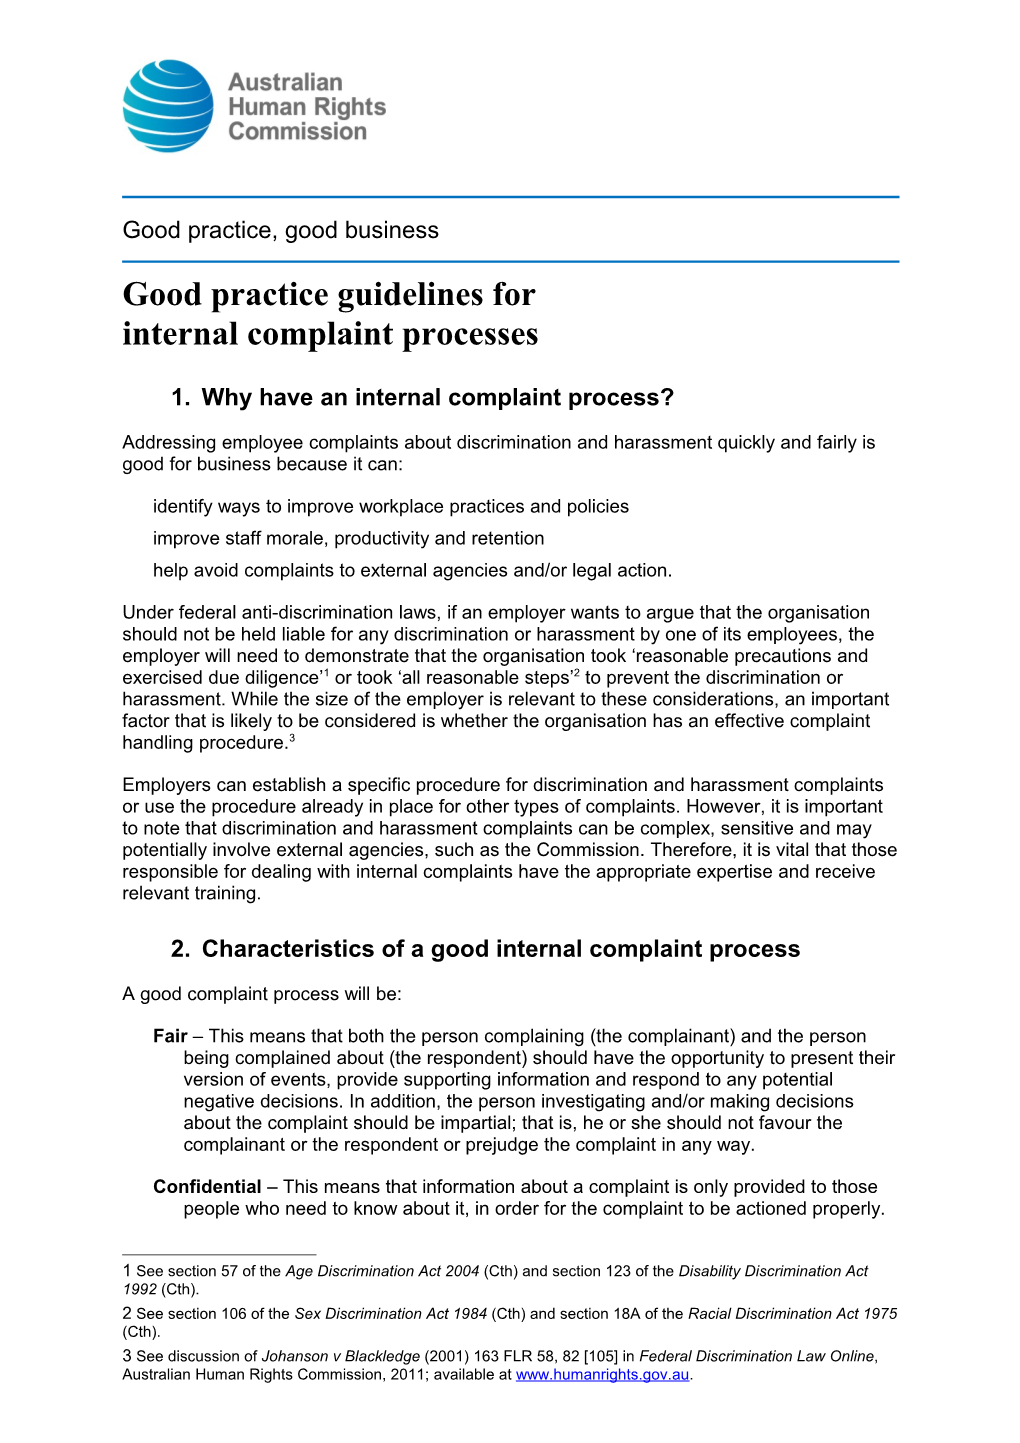 Good Practice Guidelines for Internal Complaint Processes